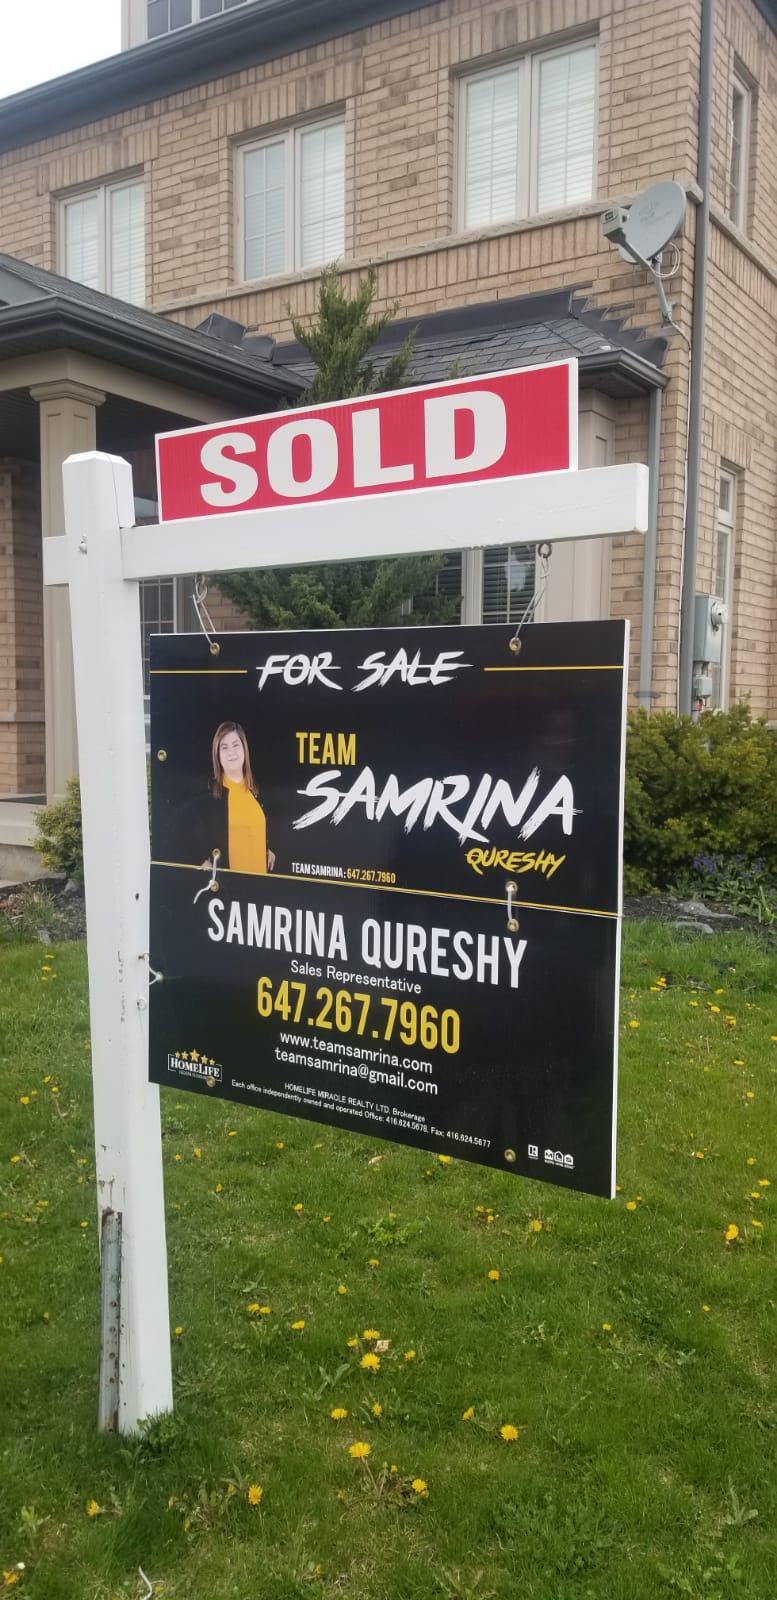 Team Samrina Qureshy Homelife Miracle Office | real estate agency | 8250 Lawson Rd #108, Milton, ON L9T 5C6, Canada | 6472677960 OR +1 647-267-7960